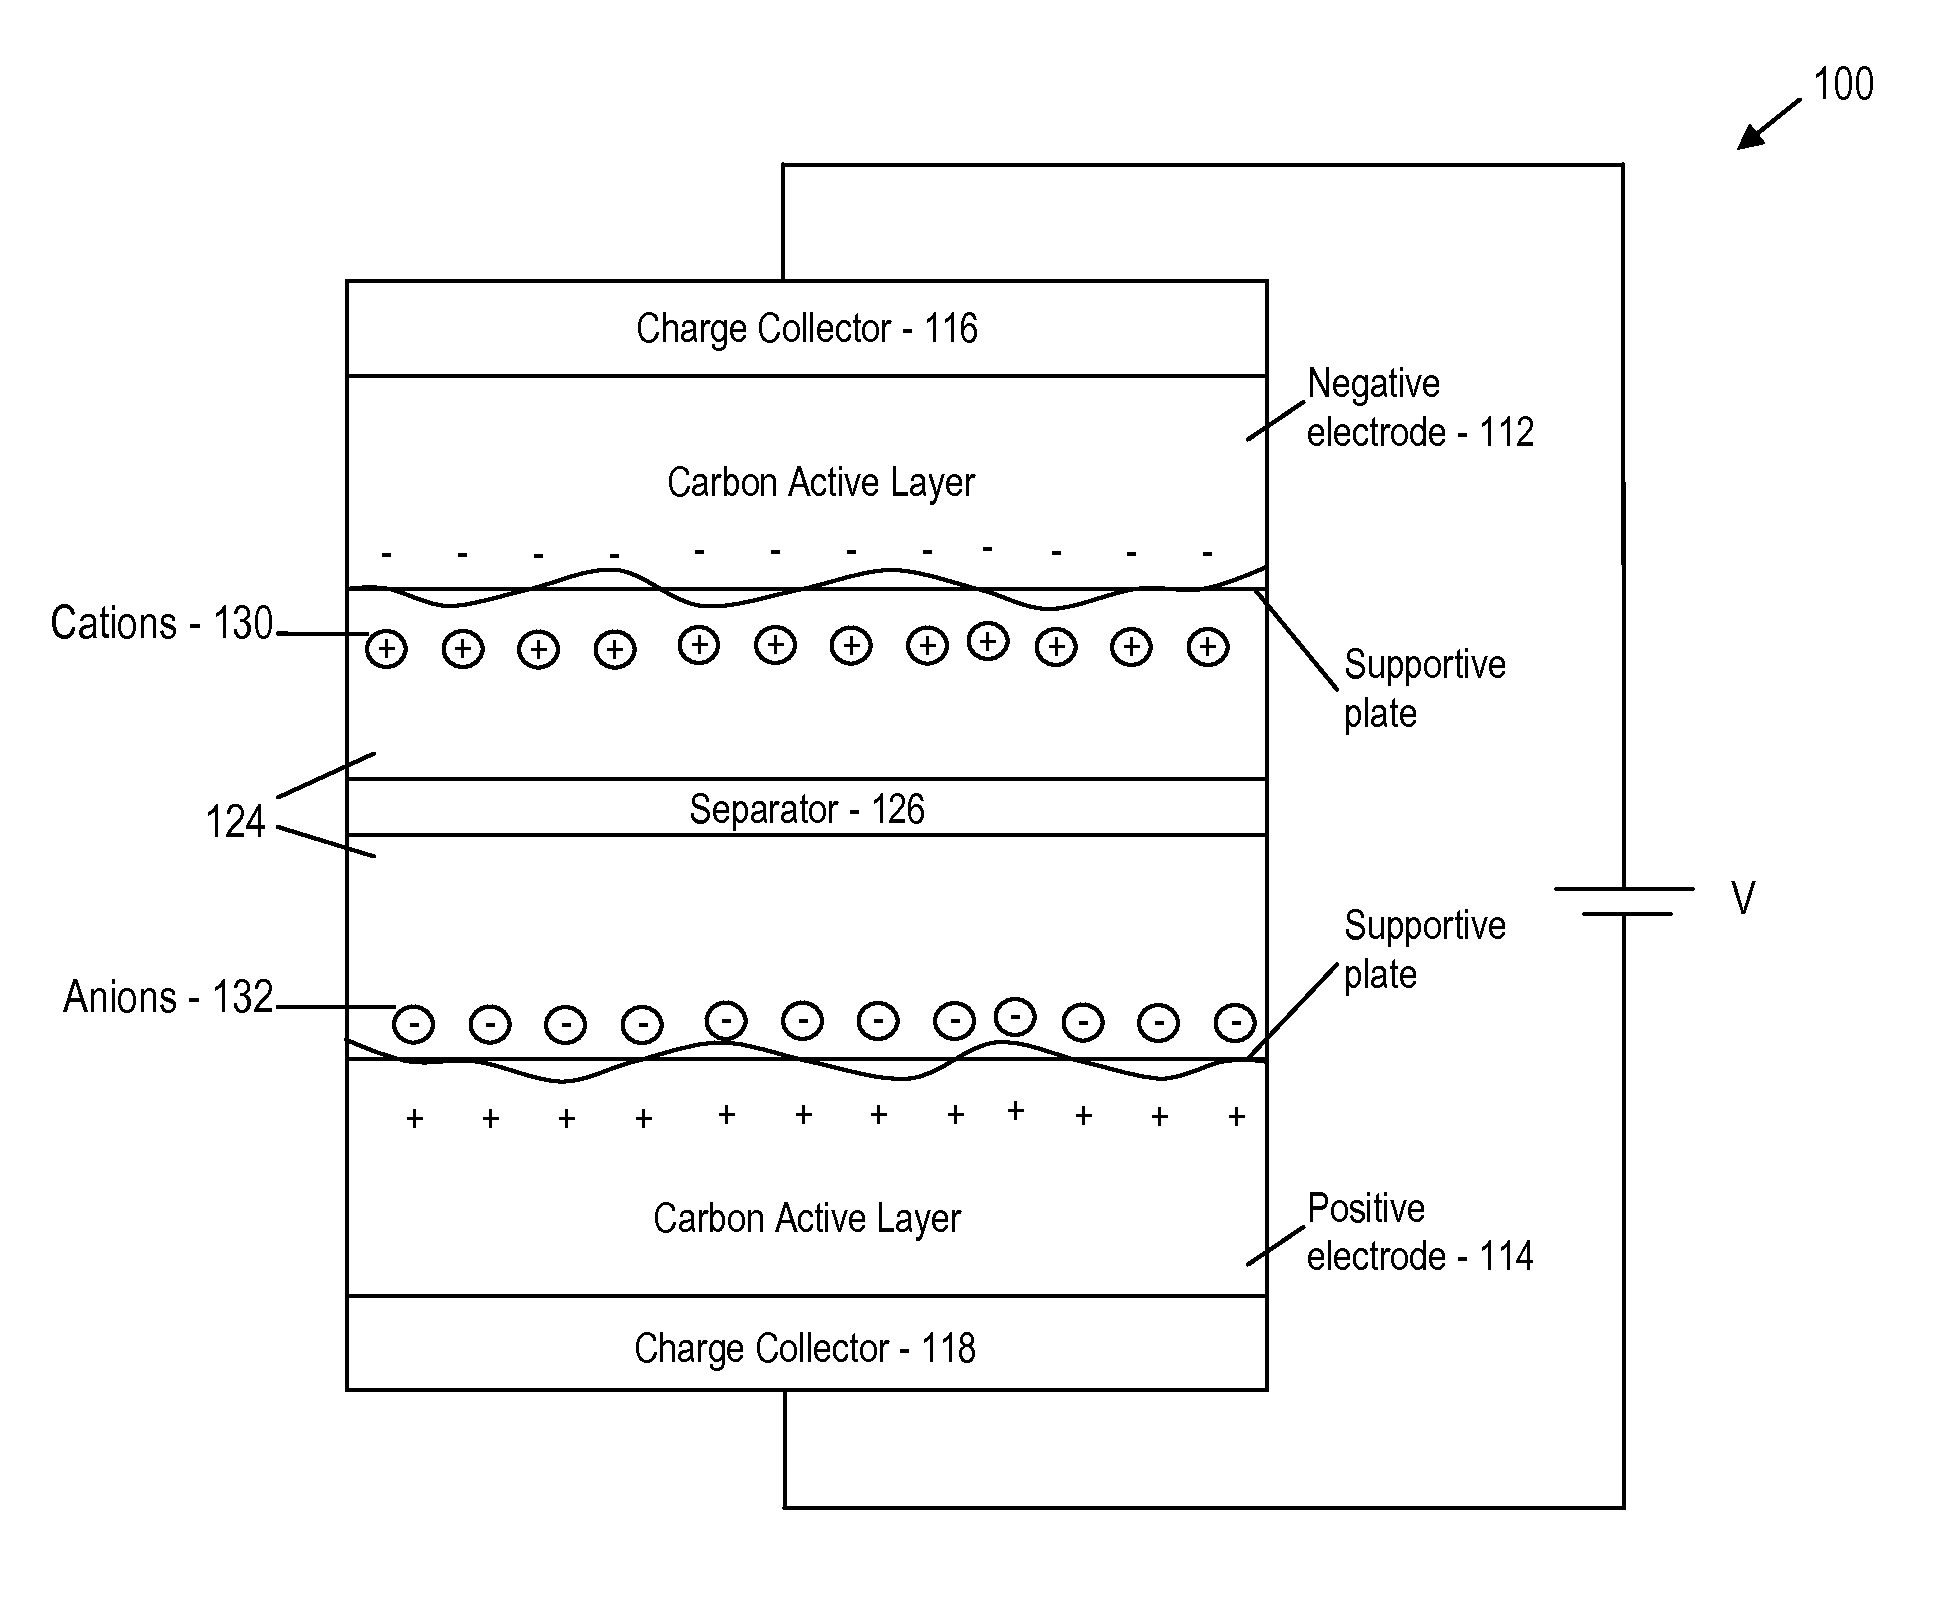 Battery-capacitor hybrid energy storage system for high temperature applications